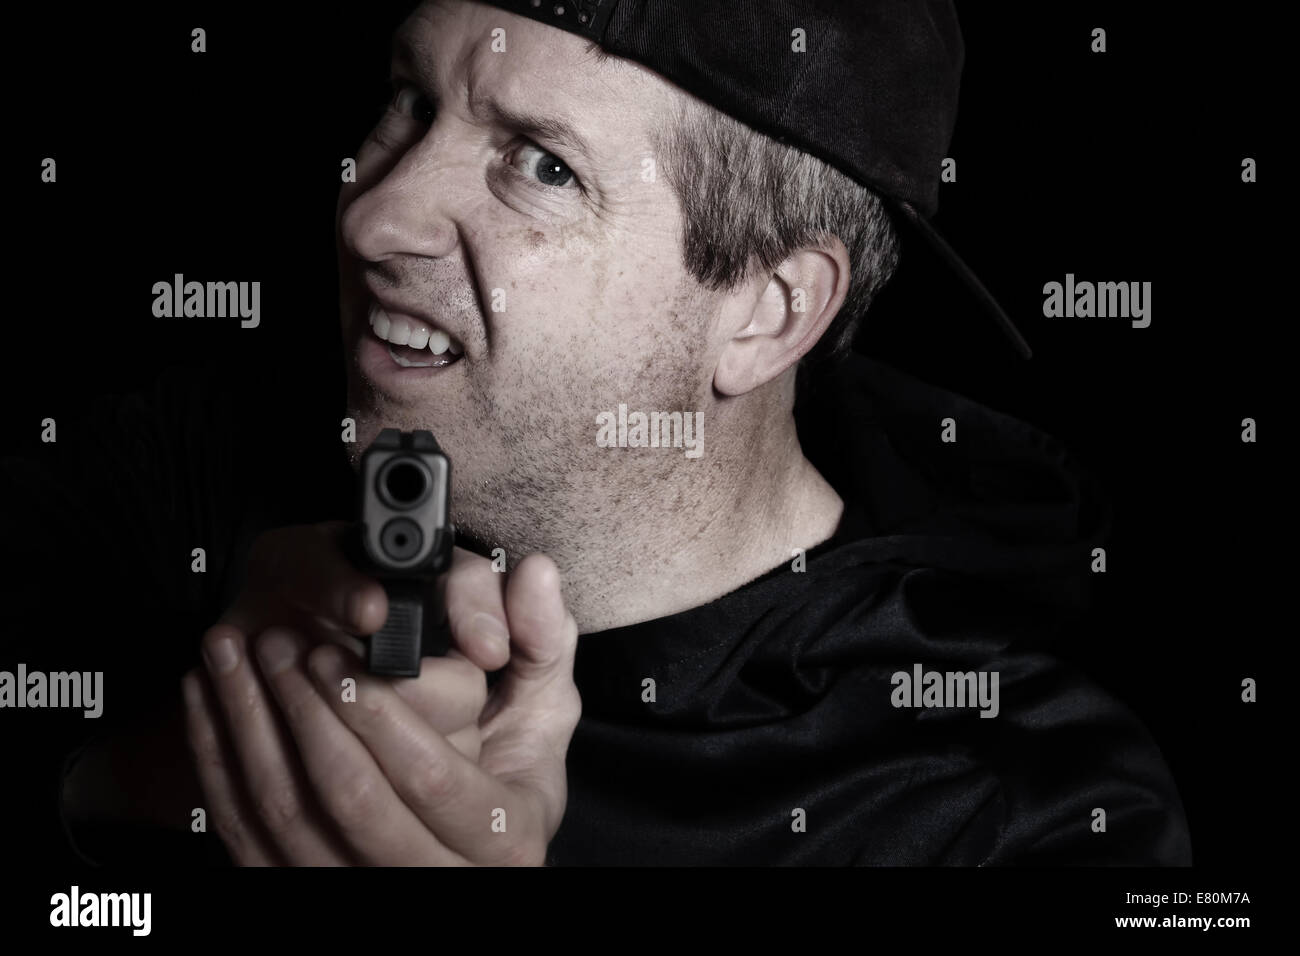 Closeup front view of mature man, looking forward and wearing baseball cap backwards, with gun in hand on dark background Stock Photo